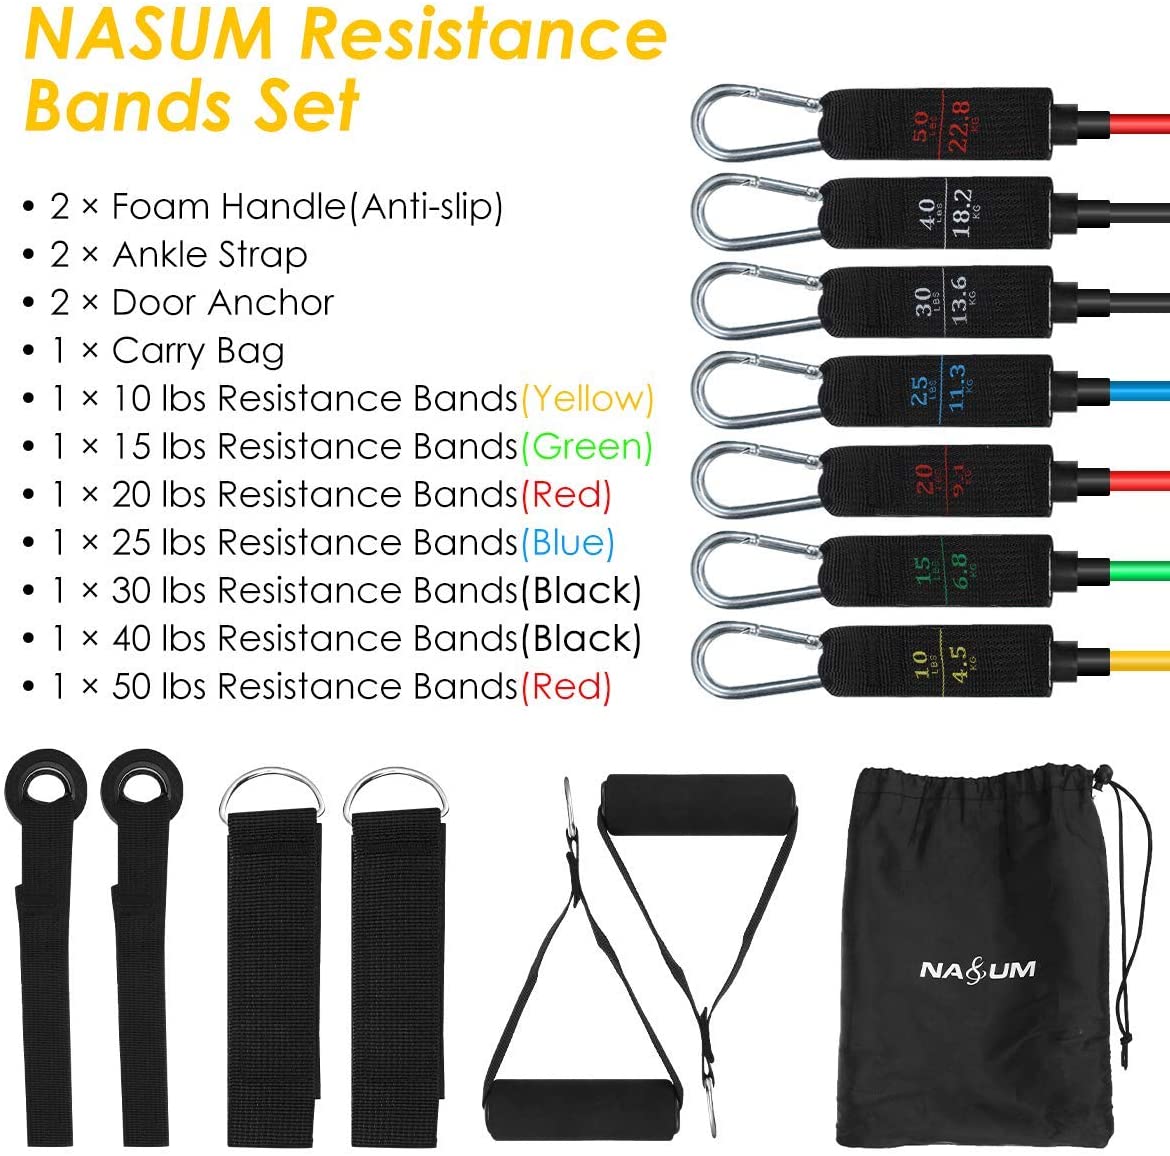 14-Pcs-Resistance-Bands-10152025304050lbs-Exercise-Bands-Sport-Fitness-for-Physical-Therapy-Home-Gym-1884421-7